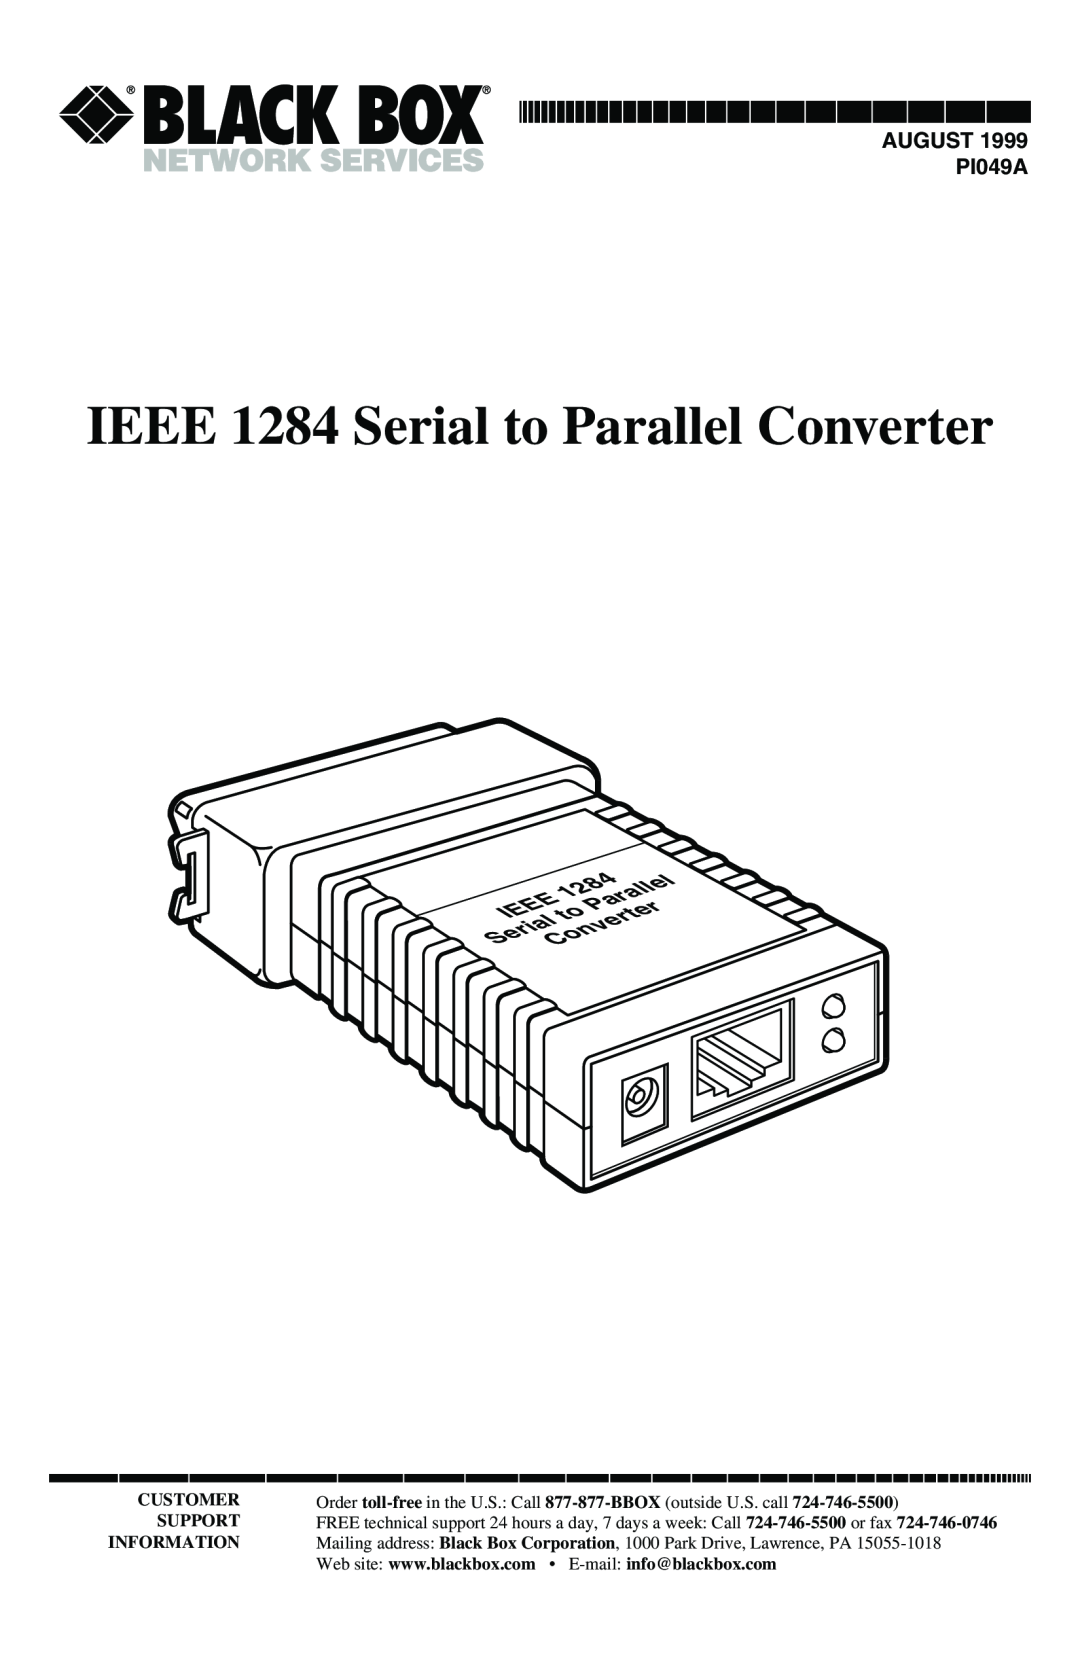 Black Box manual IEEE 1284 Serial to Parallel Converter, AUGUST PI049A, Customer, Support 